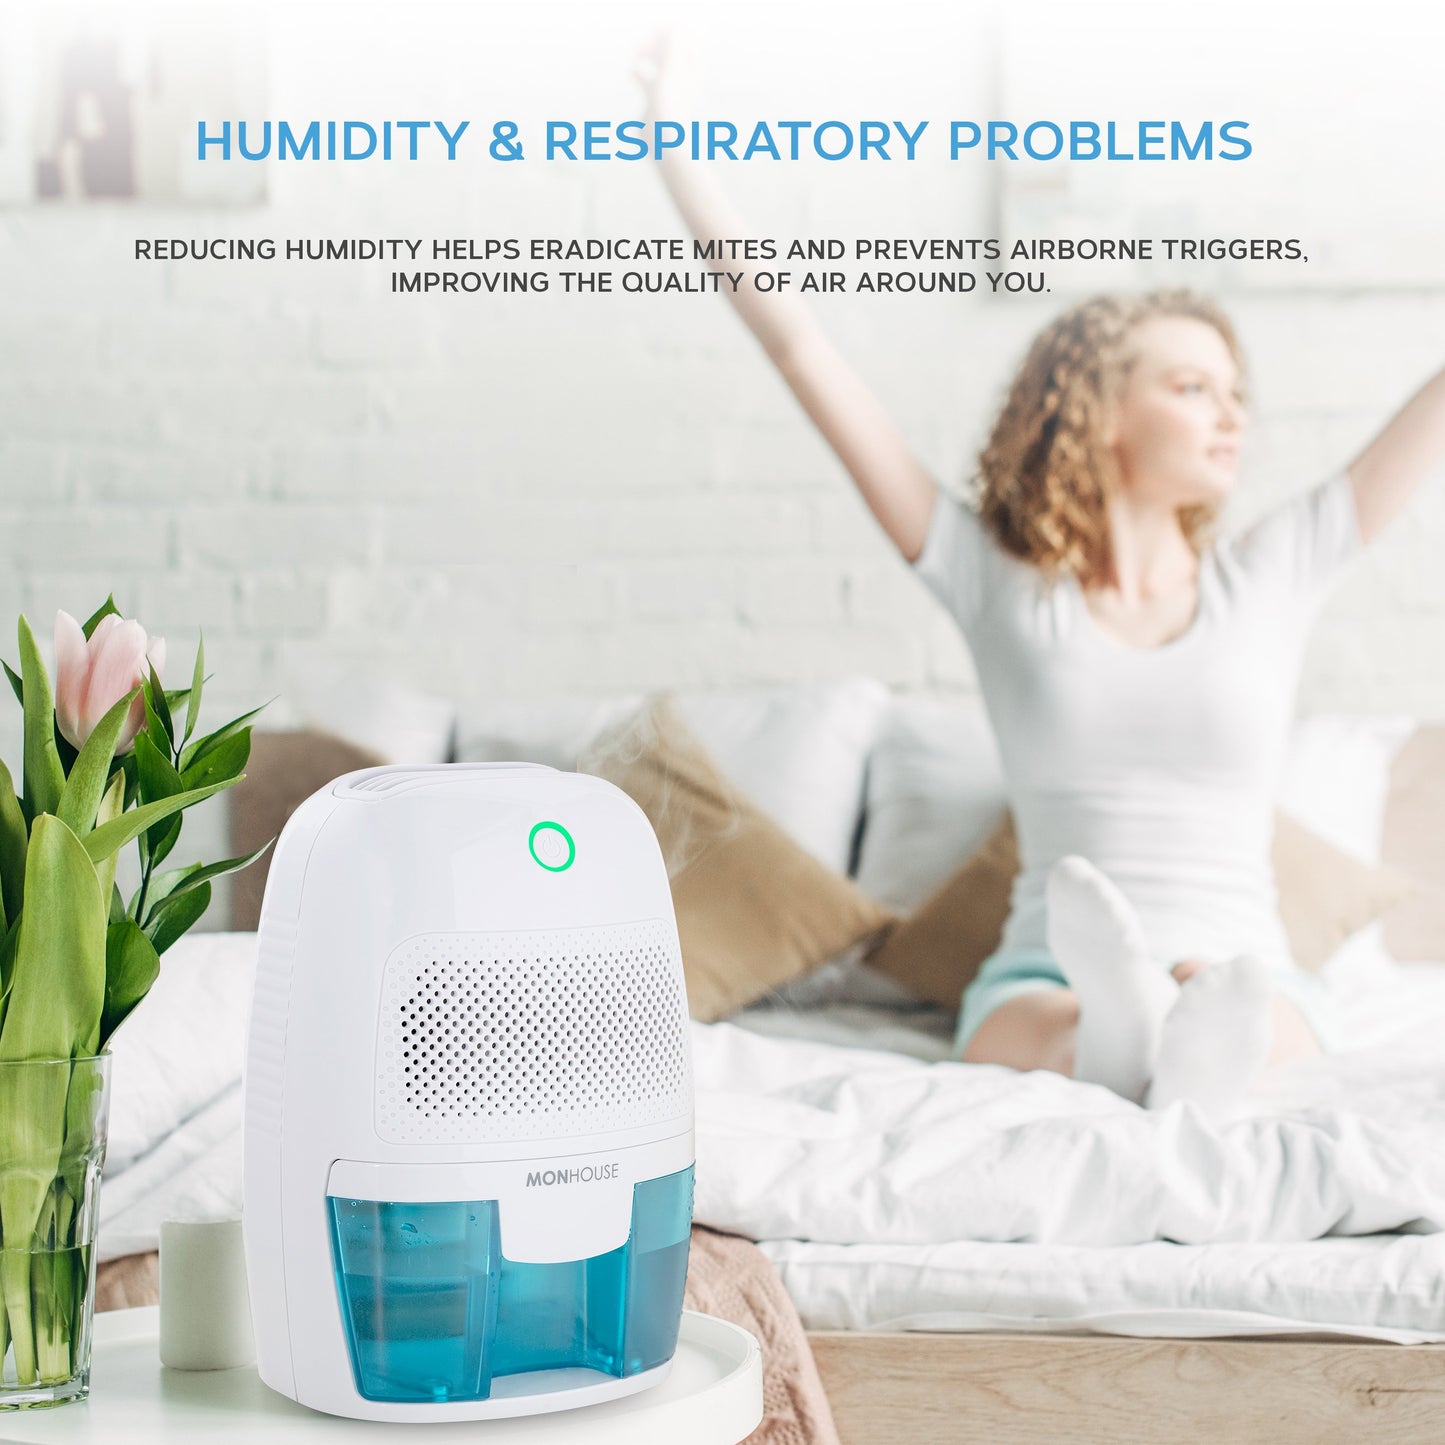 MONHOUSE Dehumidifier, 600 ml, portable, compact and quiet moisture  absorber, mini dehumidifier for home, bedroom, moisture, car, electric  mould